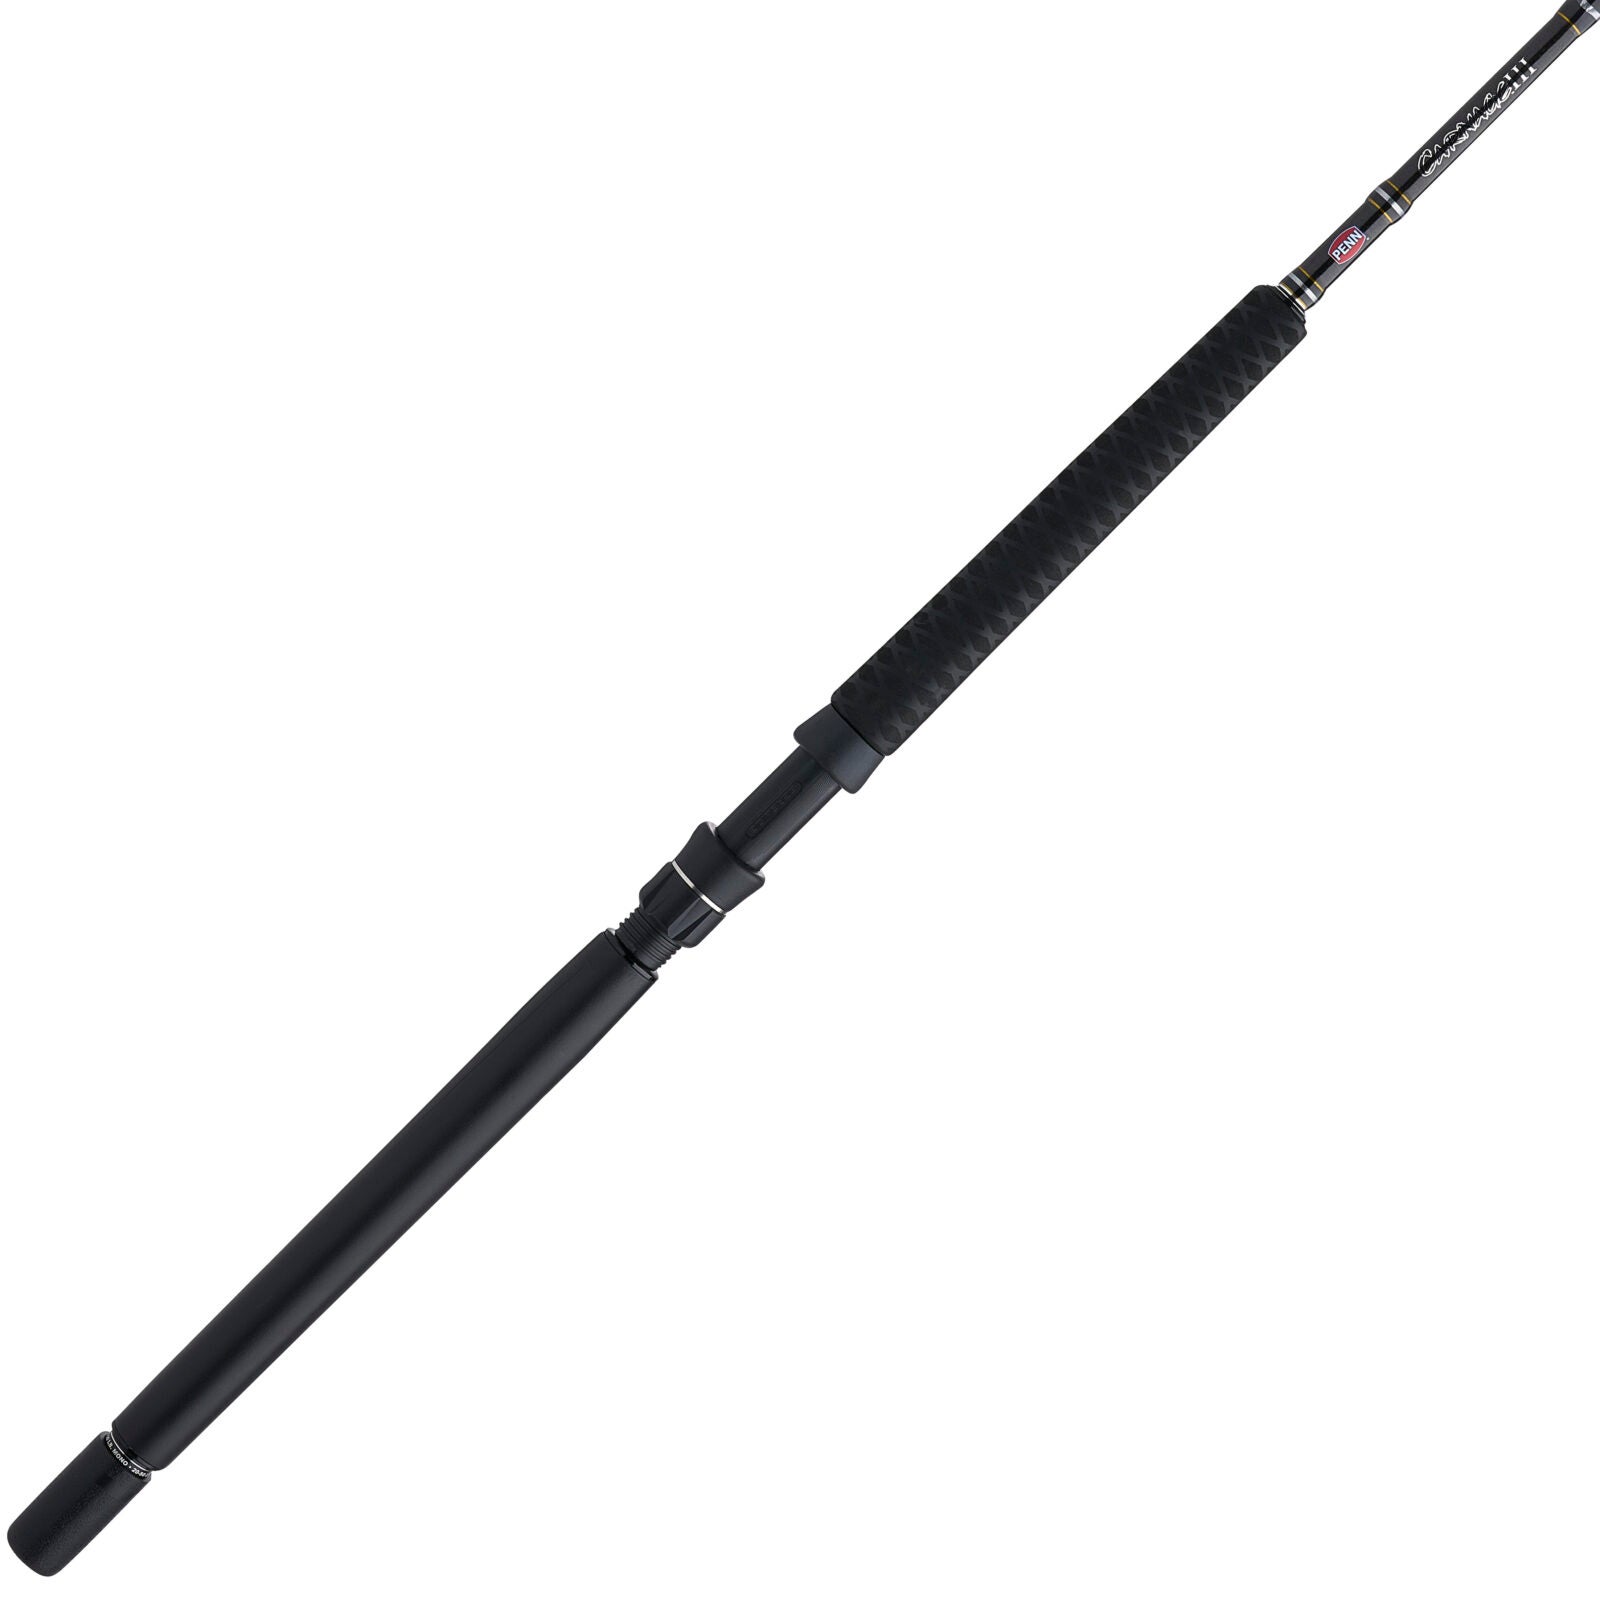 New LS2 Rod Construction PENN Carnage III Offshore Rods